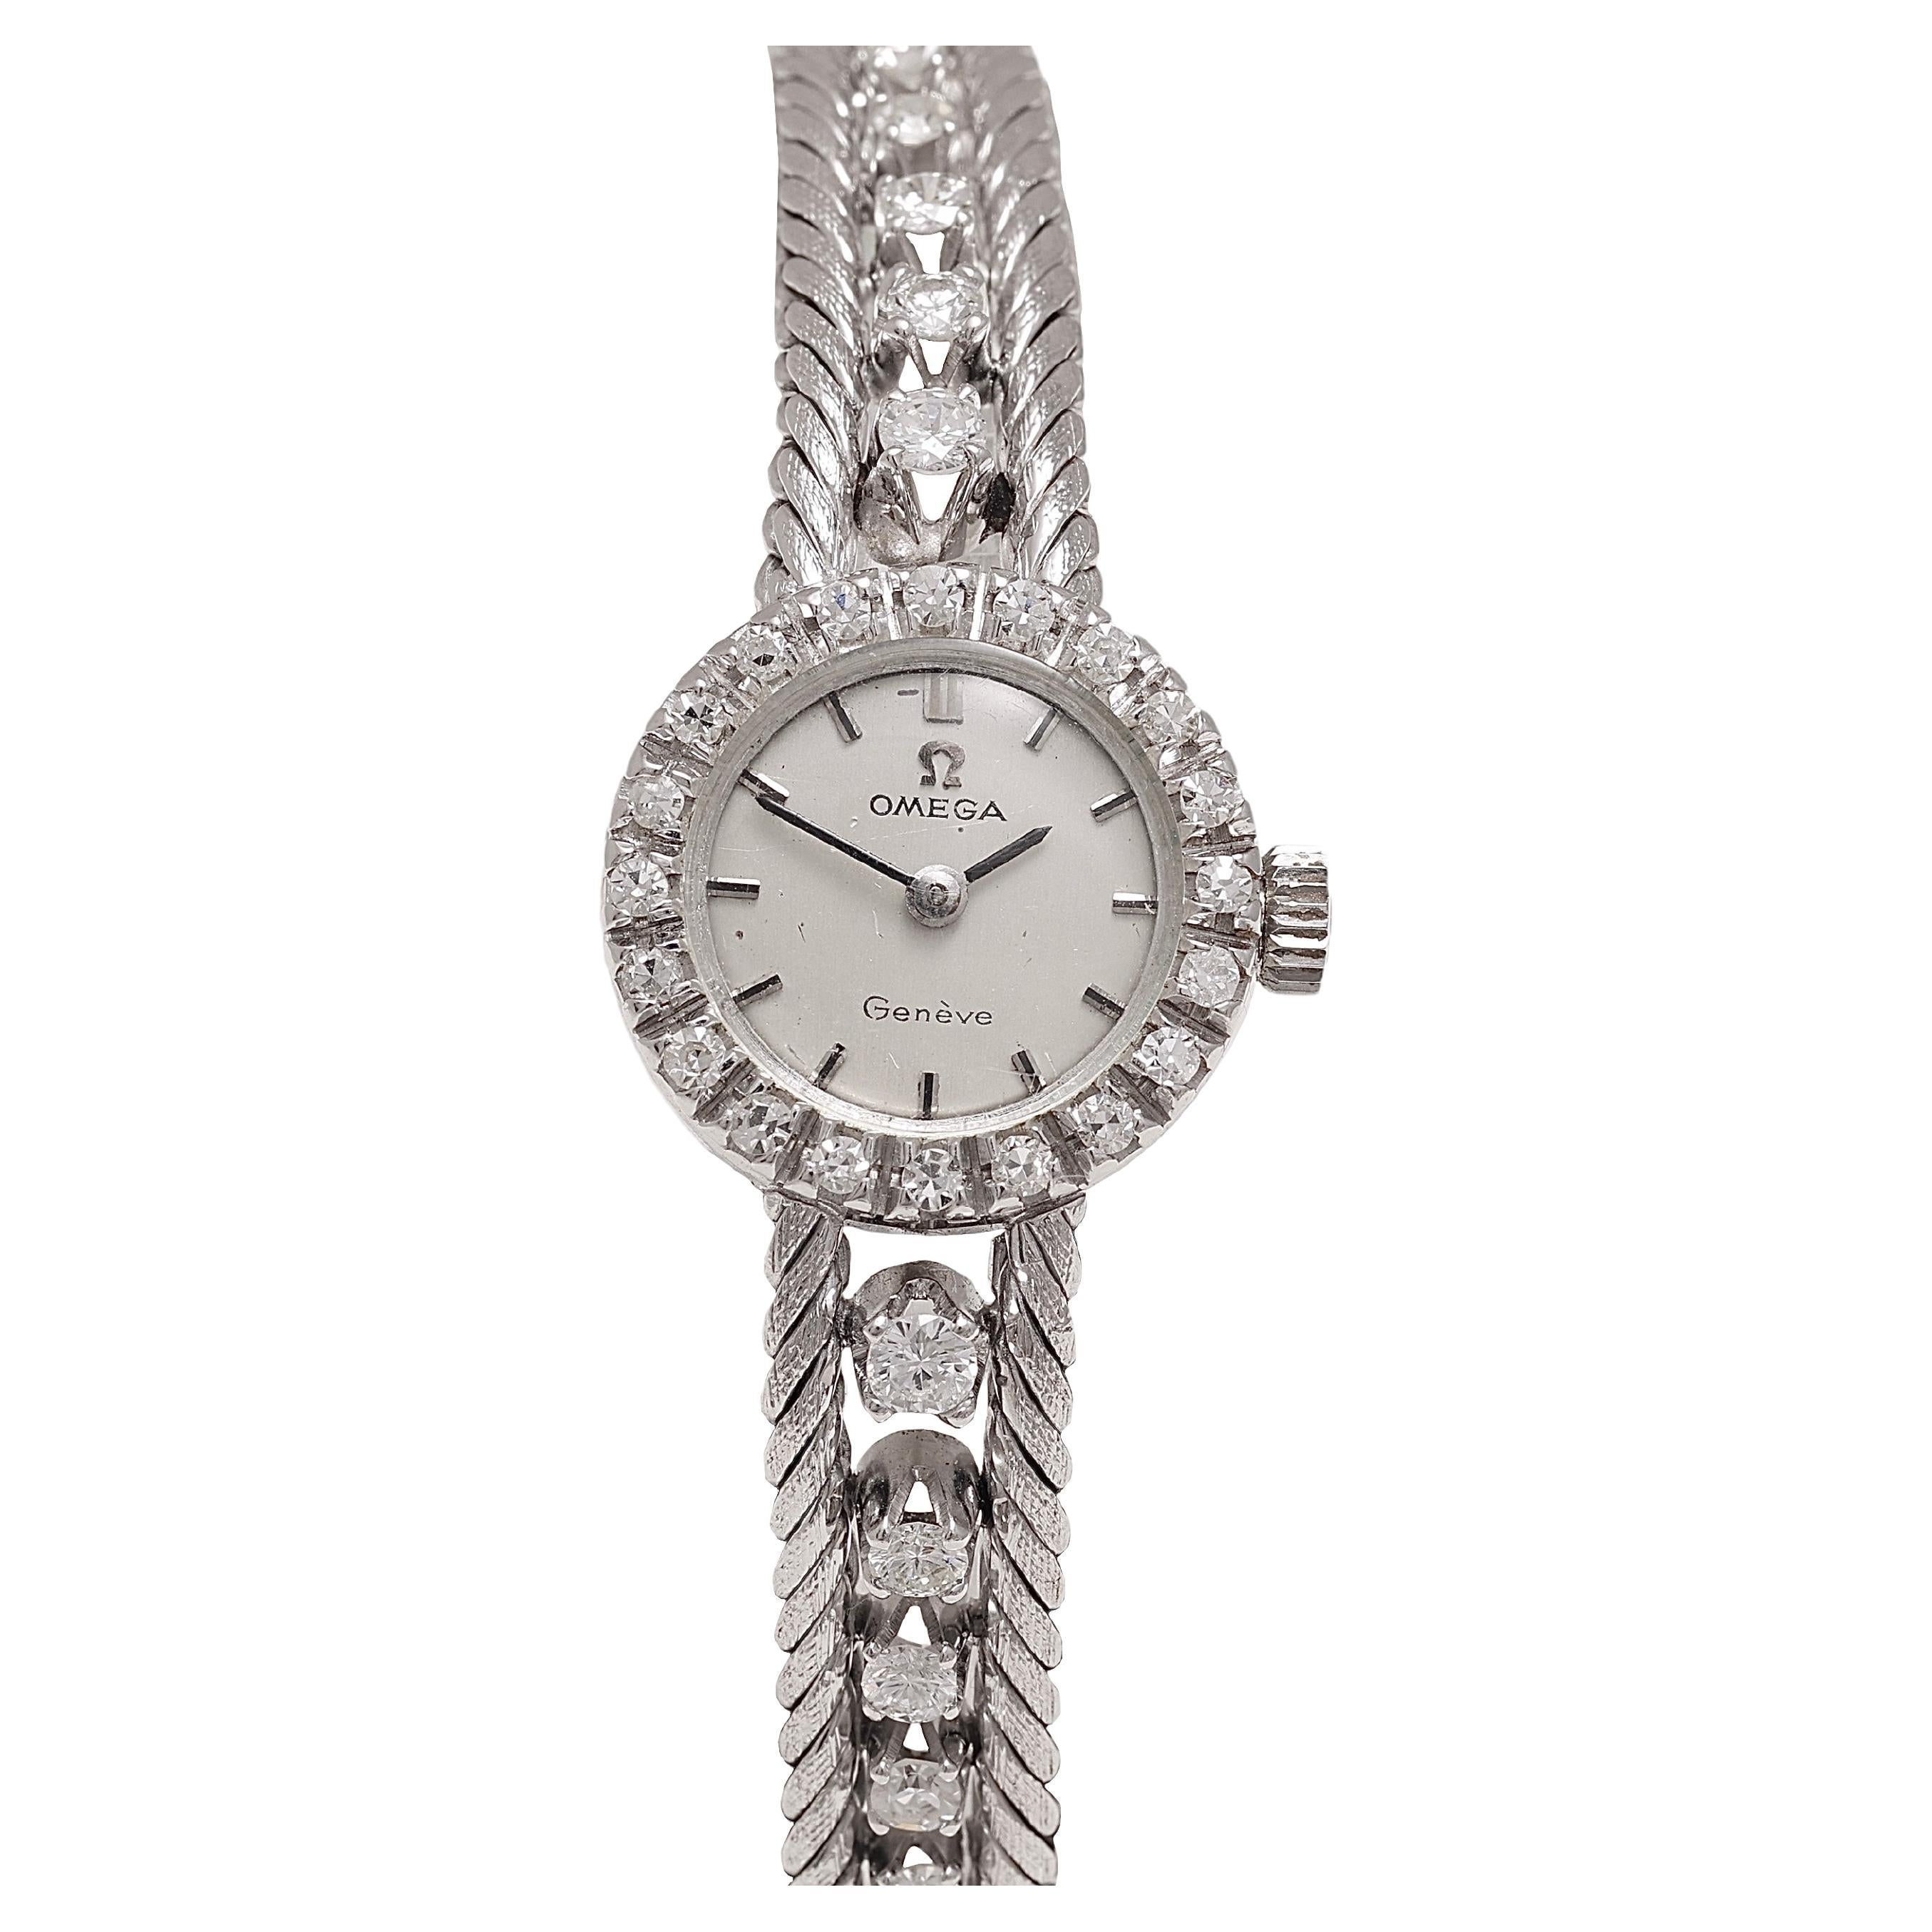 18 kt. White Gold Omega Ladies Automatic Wristwatch with 1.32 ct. Diamonds